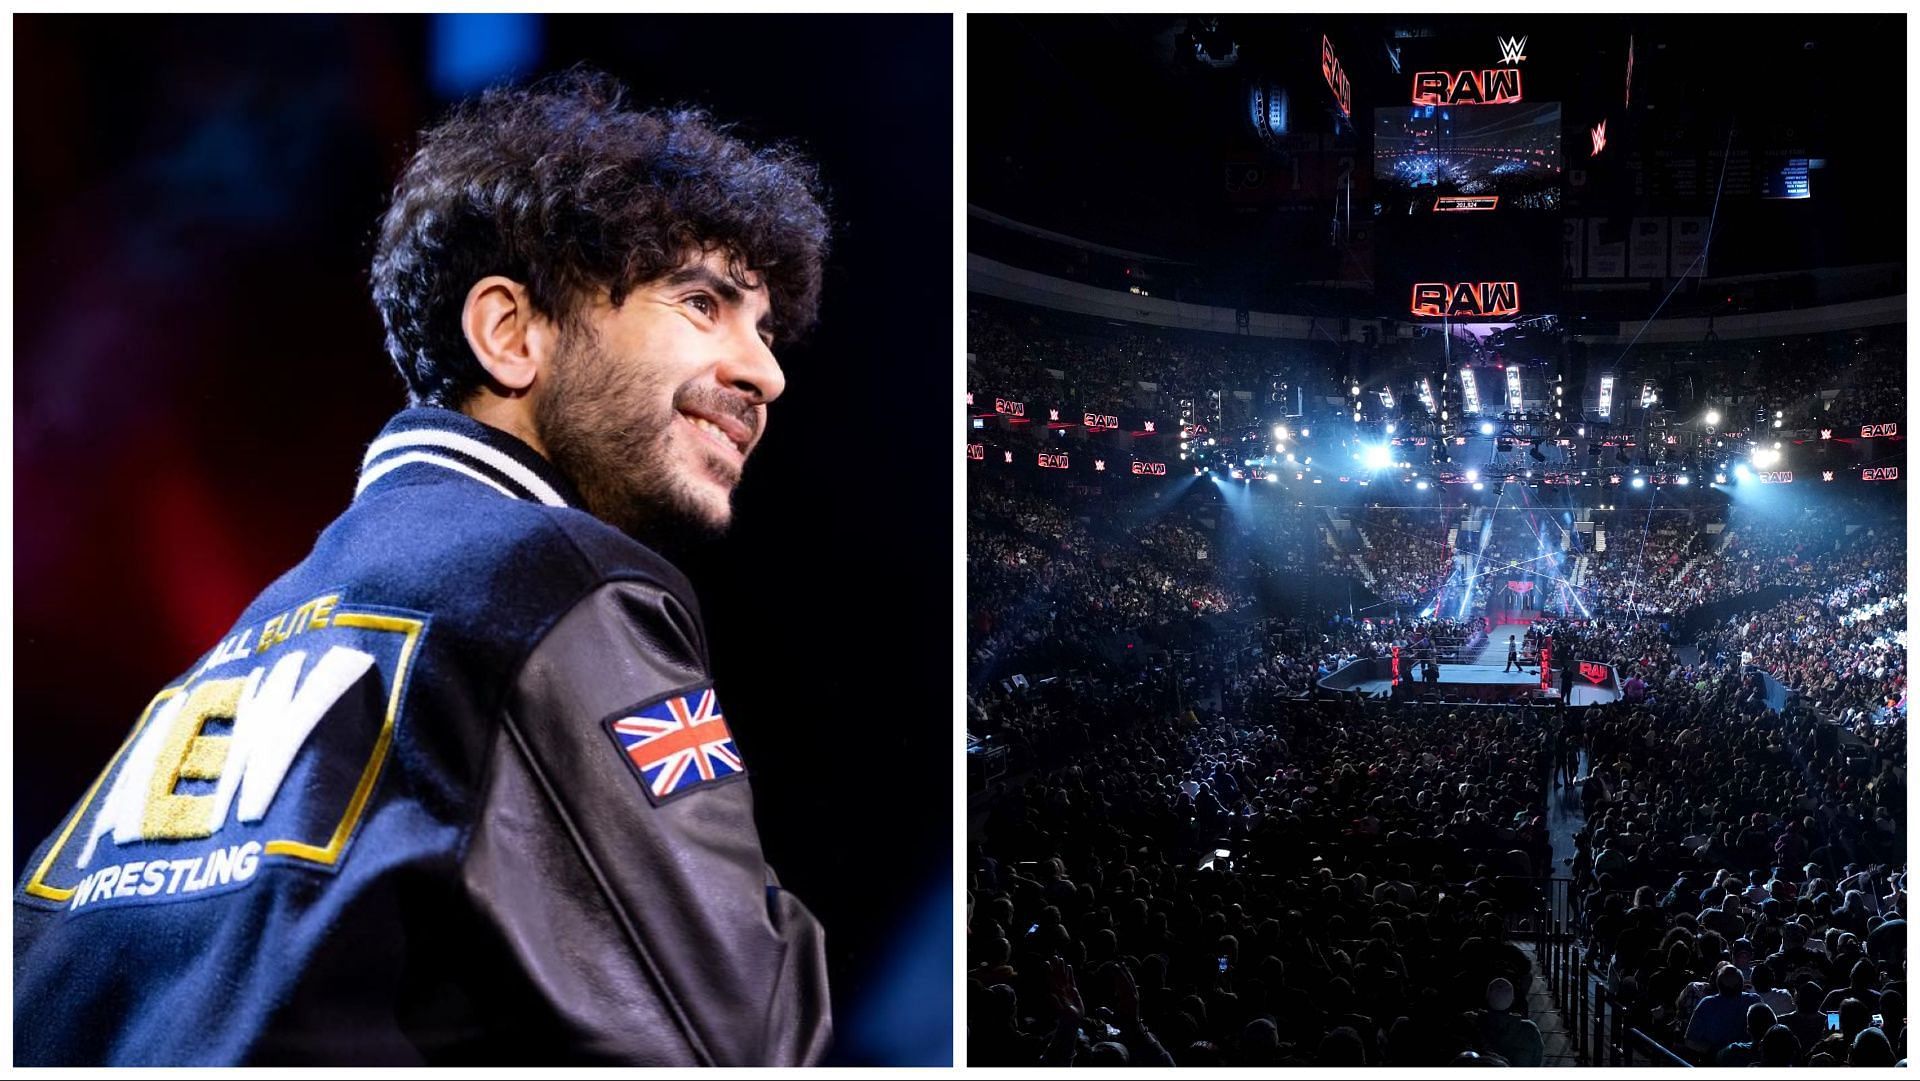 Tony Khan at AEW Dynamite, Fans pack the arena for WWE RAW